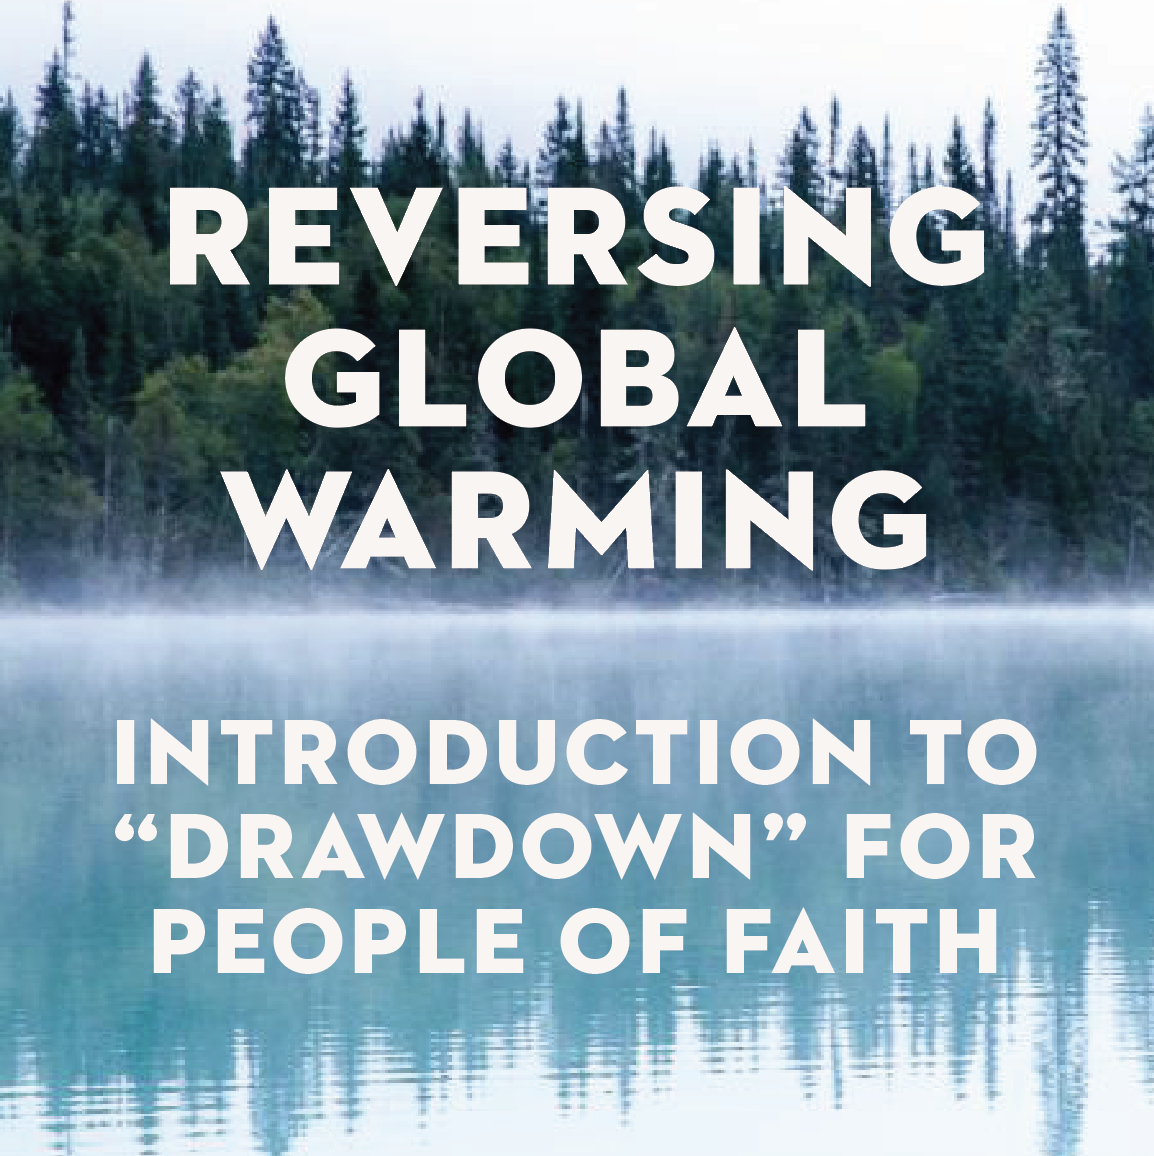 Reversing Global Warming: Introduction to “Drawdown” for People of Faith